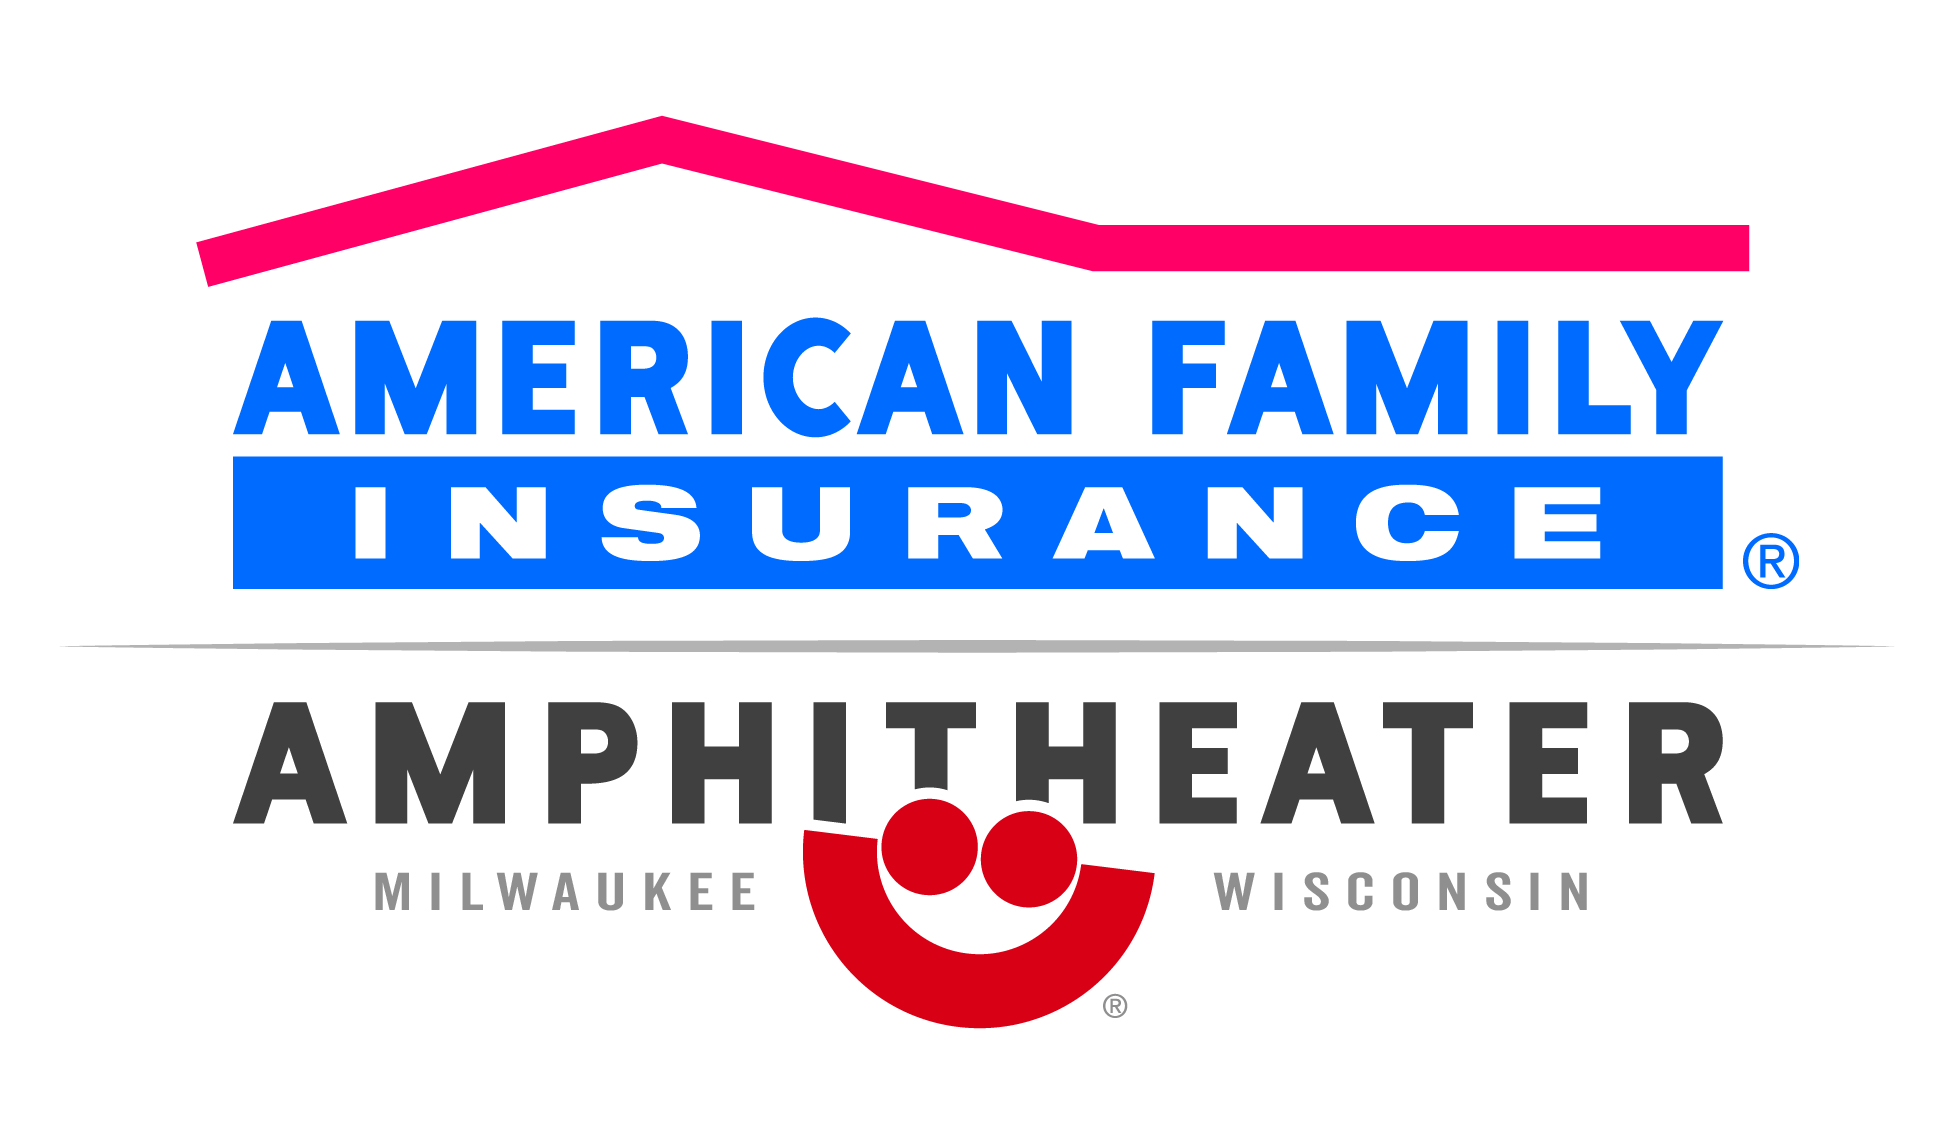 American Family Insurance Amphitheater Interactive Seating Chart